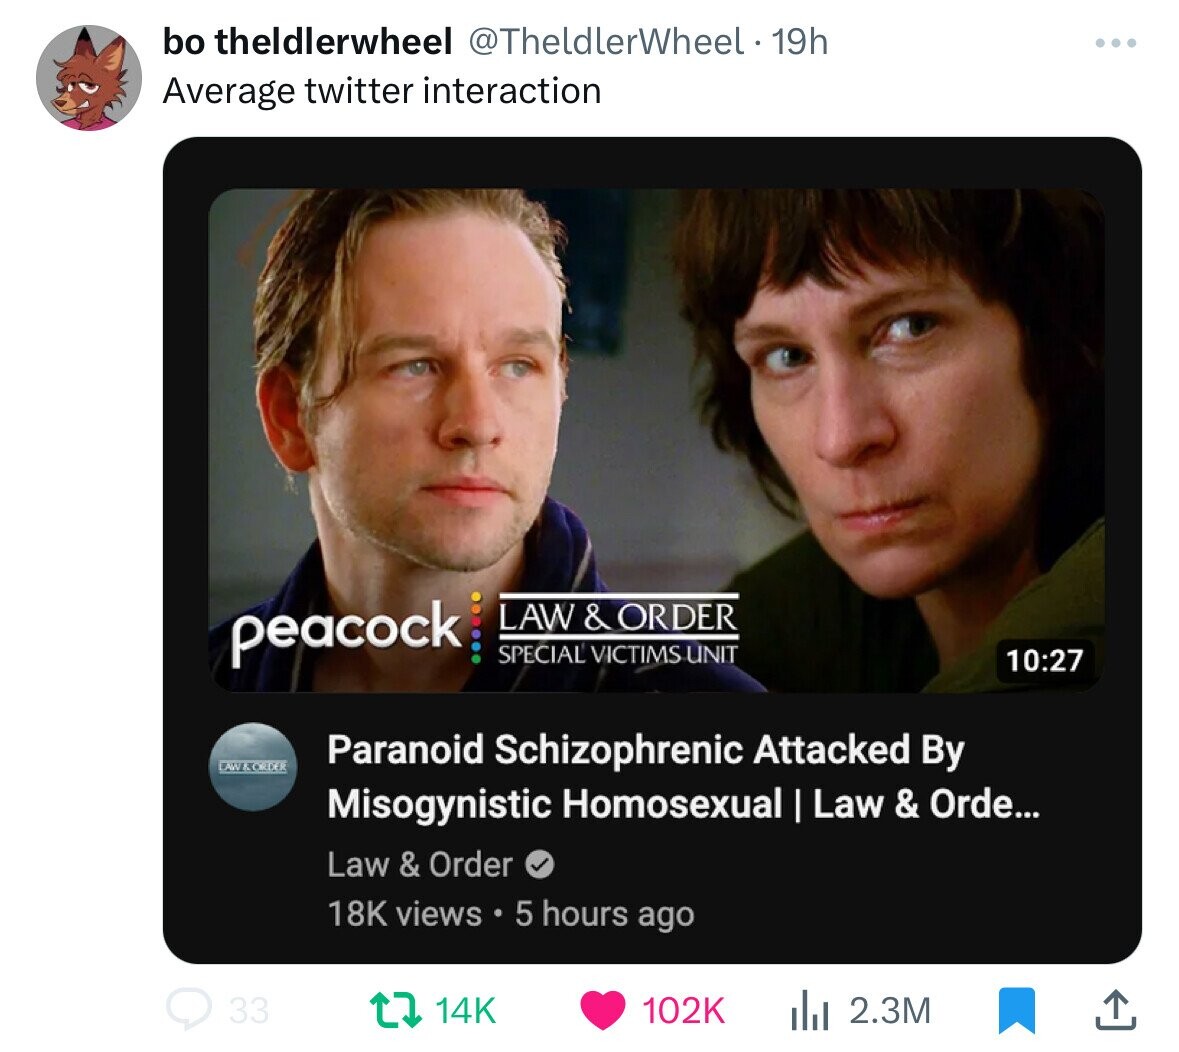 photo caption - . bo theldlerwheel 19h Average twitter interaction peacock Law & Order Special Victims Unit Law & Order 33 Paranoid Schizophrenic Attacked By Misogynistic Homosexual | Law & Orde... Law & Order 18K views 5 hours ago 14K il 2.3M